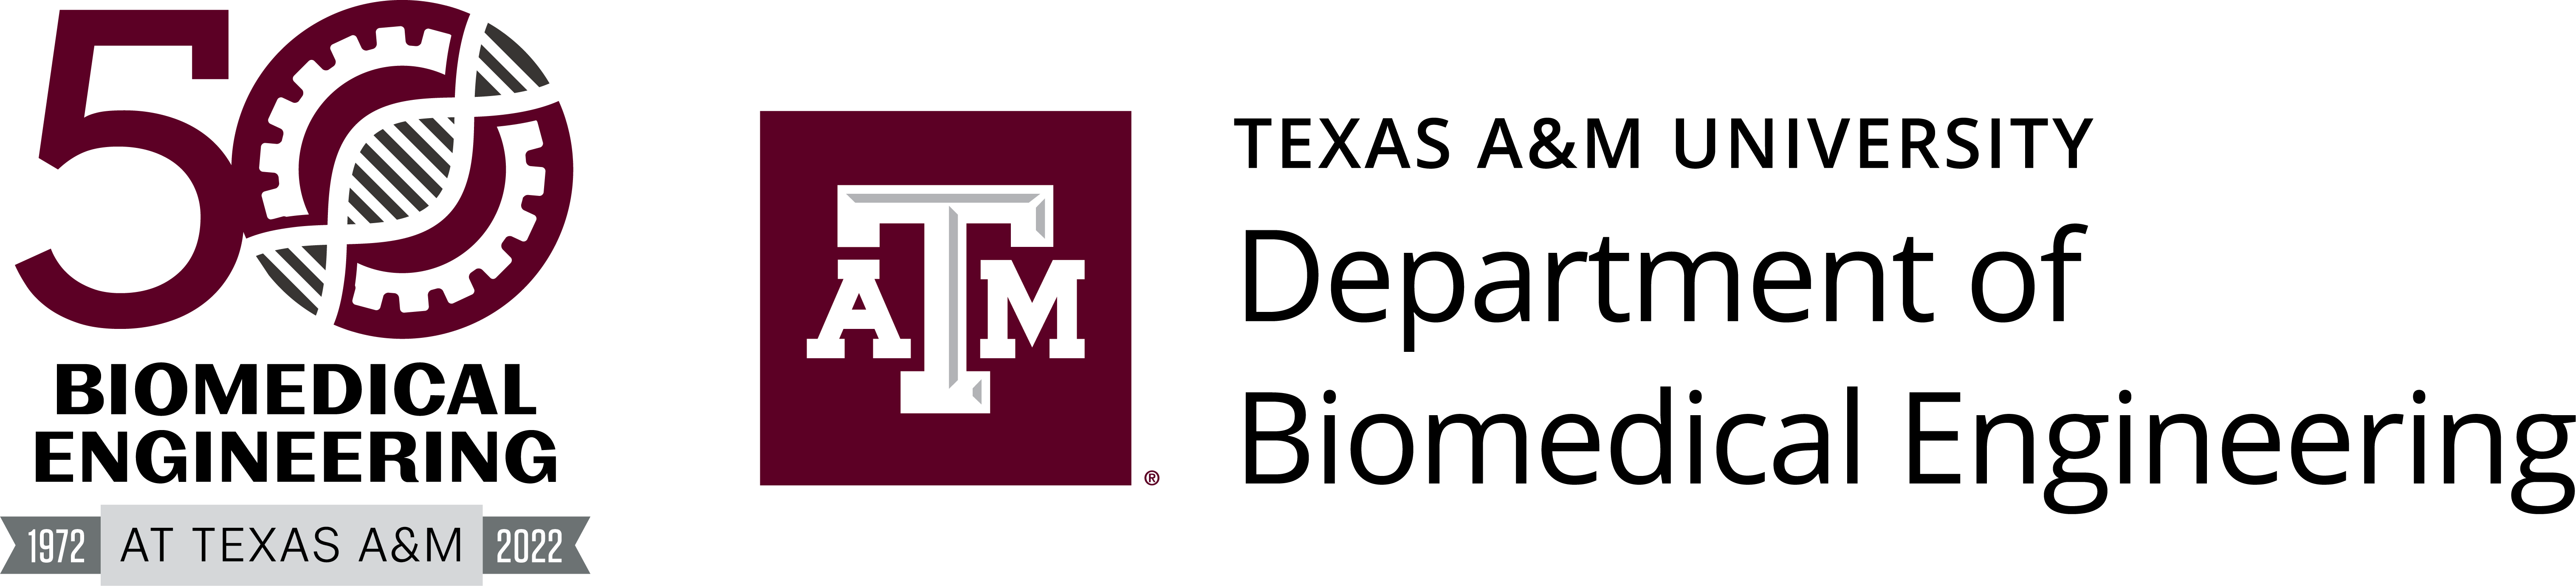 Texas A&M Department of Biomedical Engineering logo